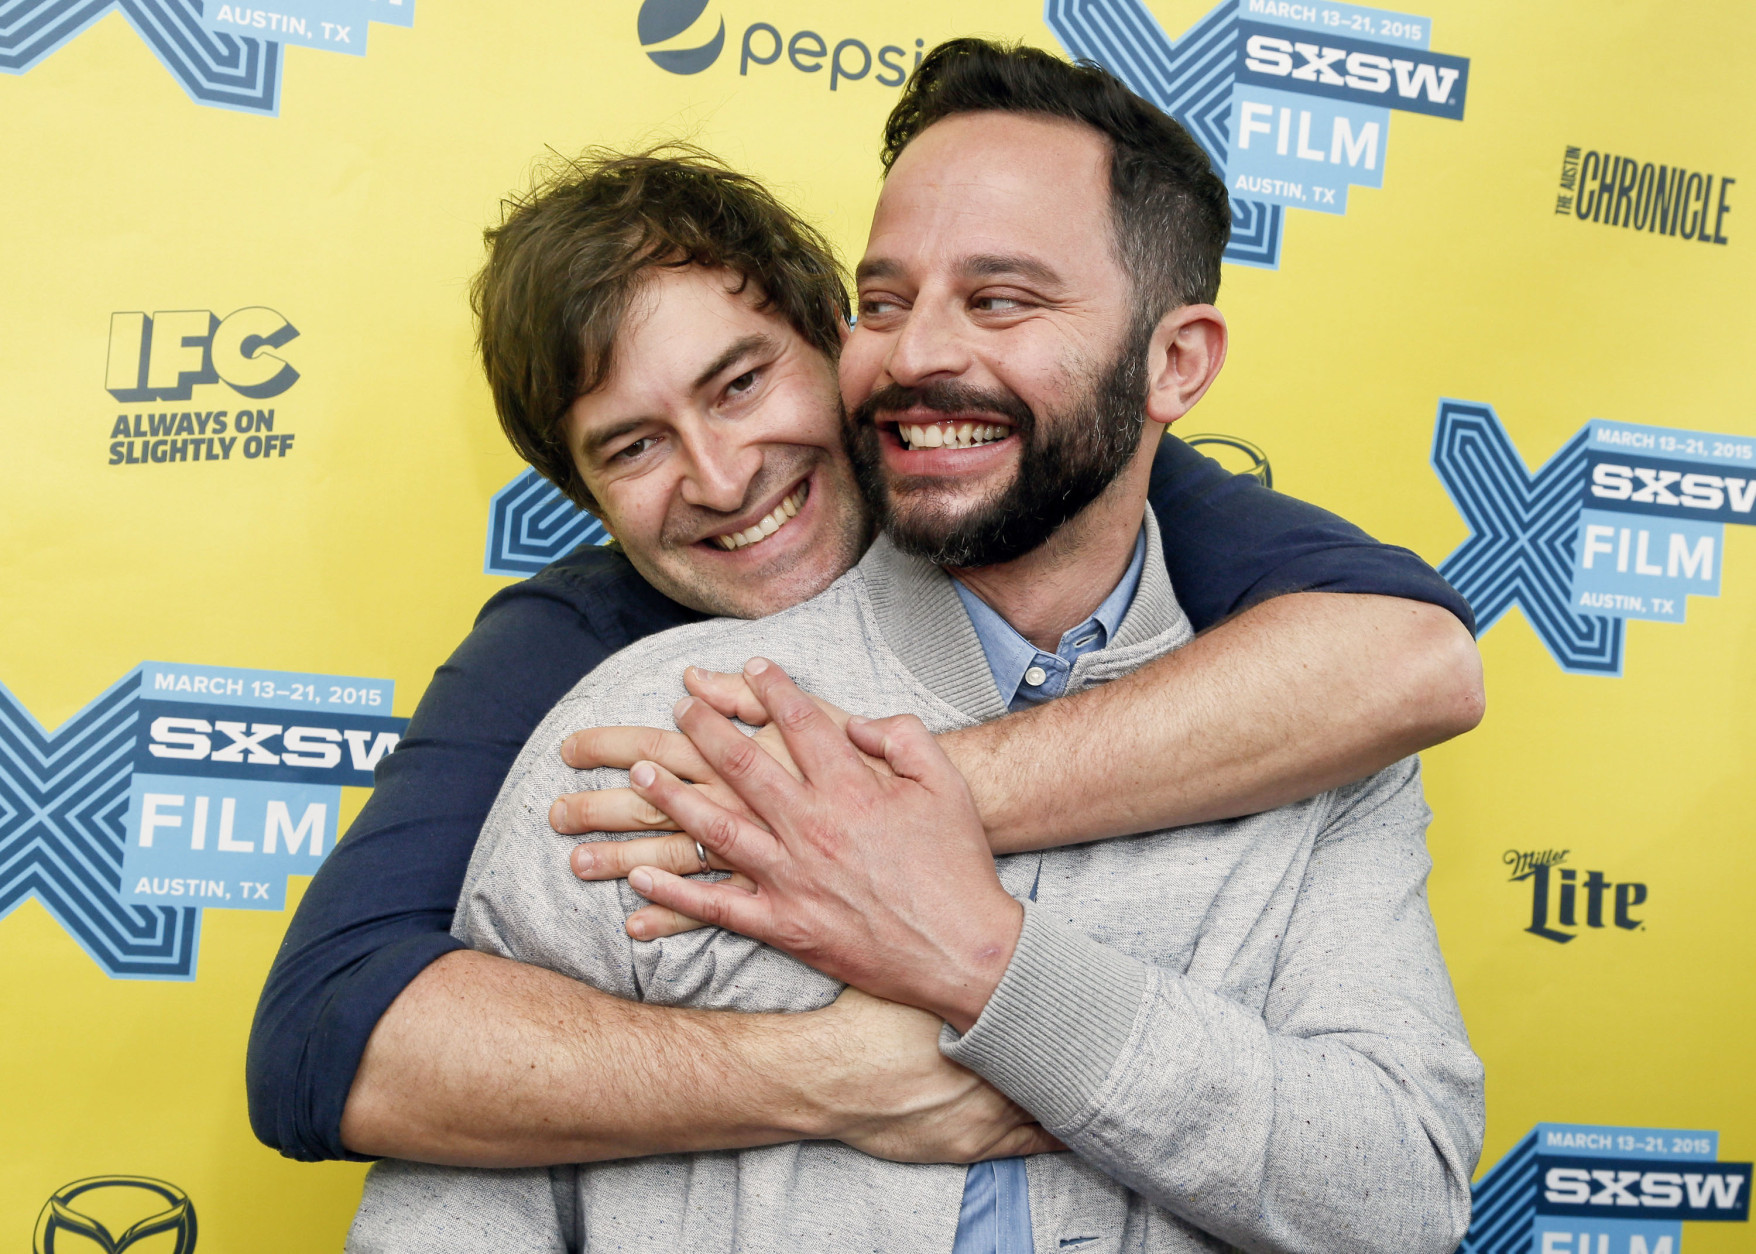 Mark Duplass, left, and Nick Kroll horse around on the red carpet for "Adult Biginners" during the South by Southwest Film Festival on Sunday, March 15, 2015 in Austin, Texas. (Photo by Jack Plunkett/Invision/AP) Ross Katz (Cast) Nick Kroll, Rose Byrne, Bobby Cannavale (Executive Producer) Mark Duplass